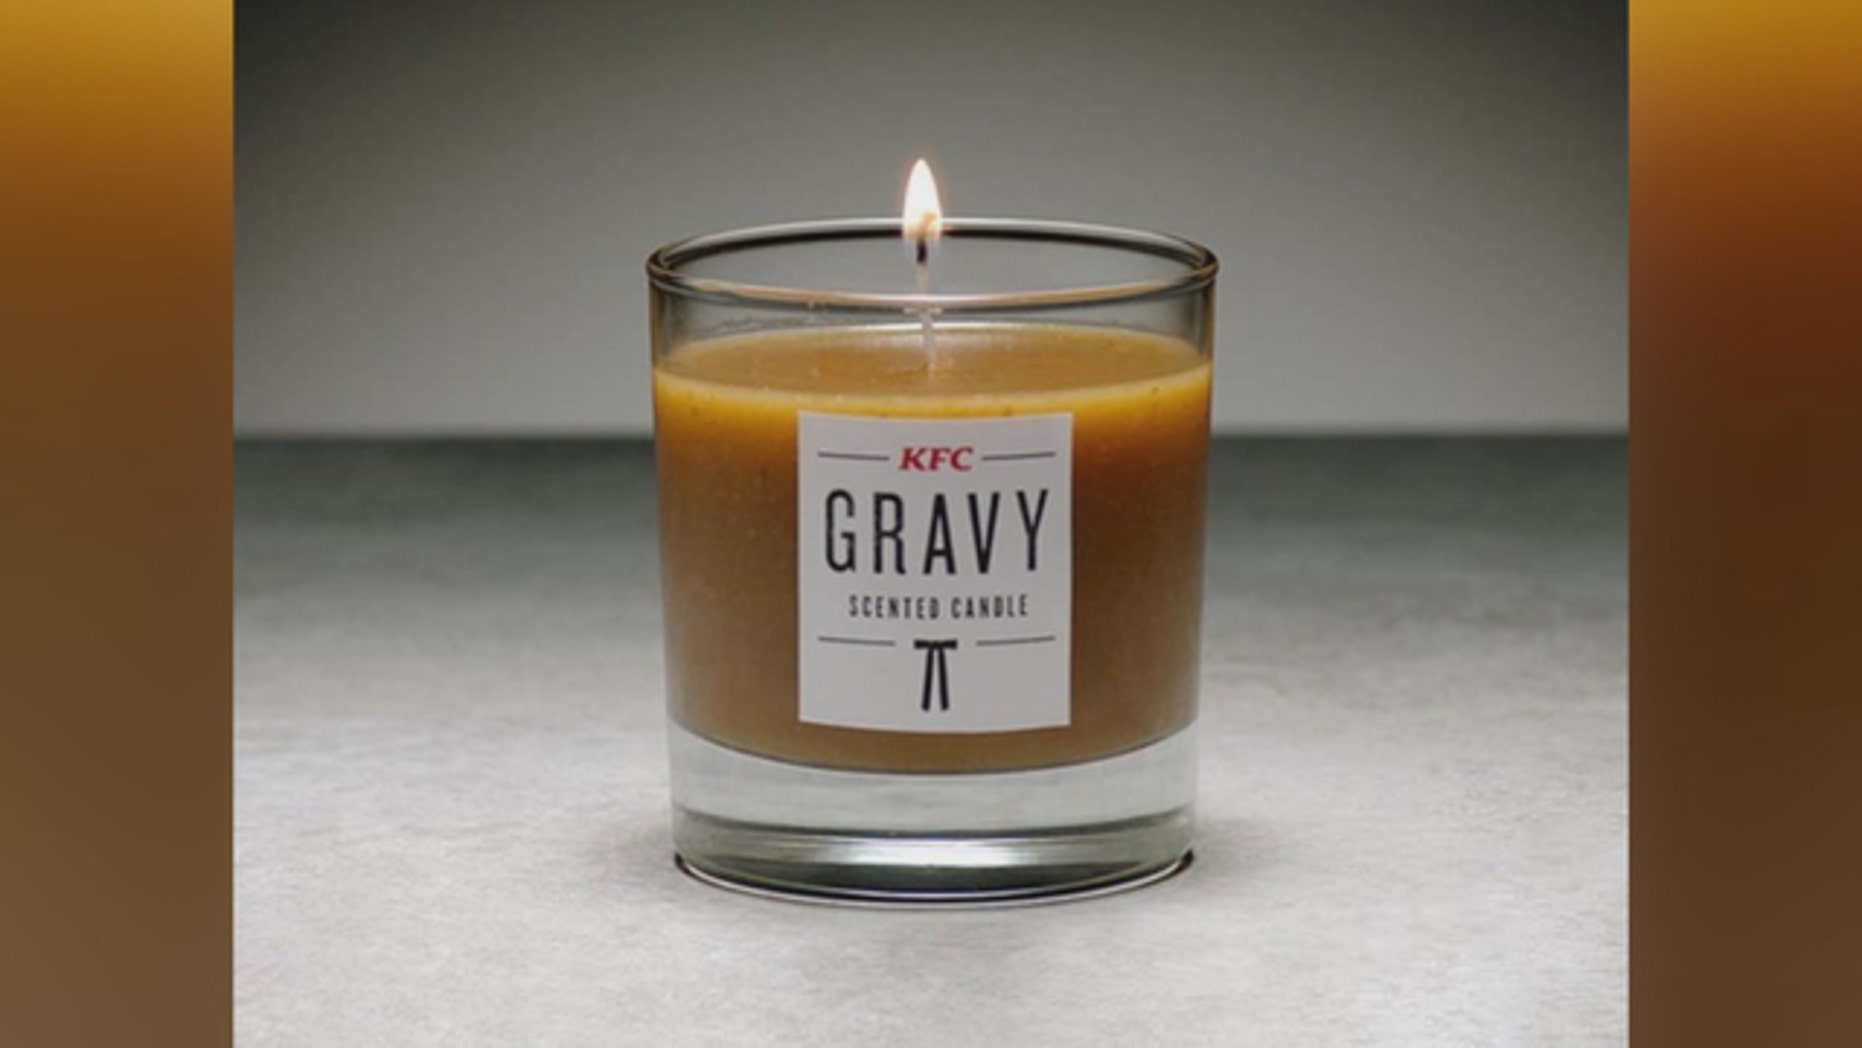 KFC debuts gravy-scented candle